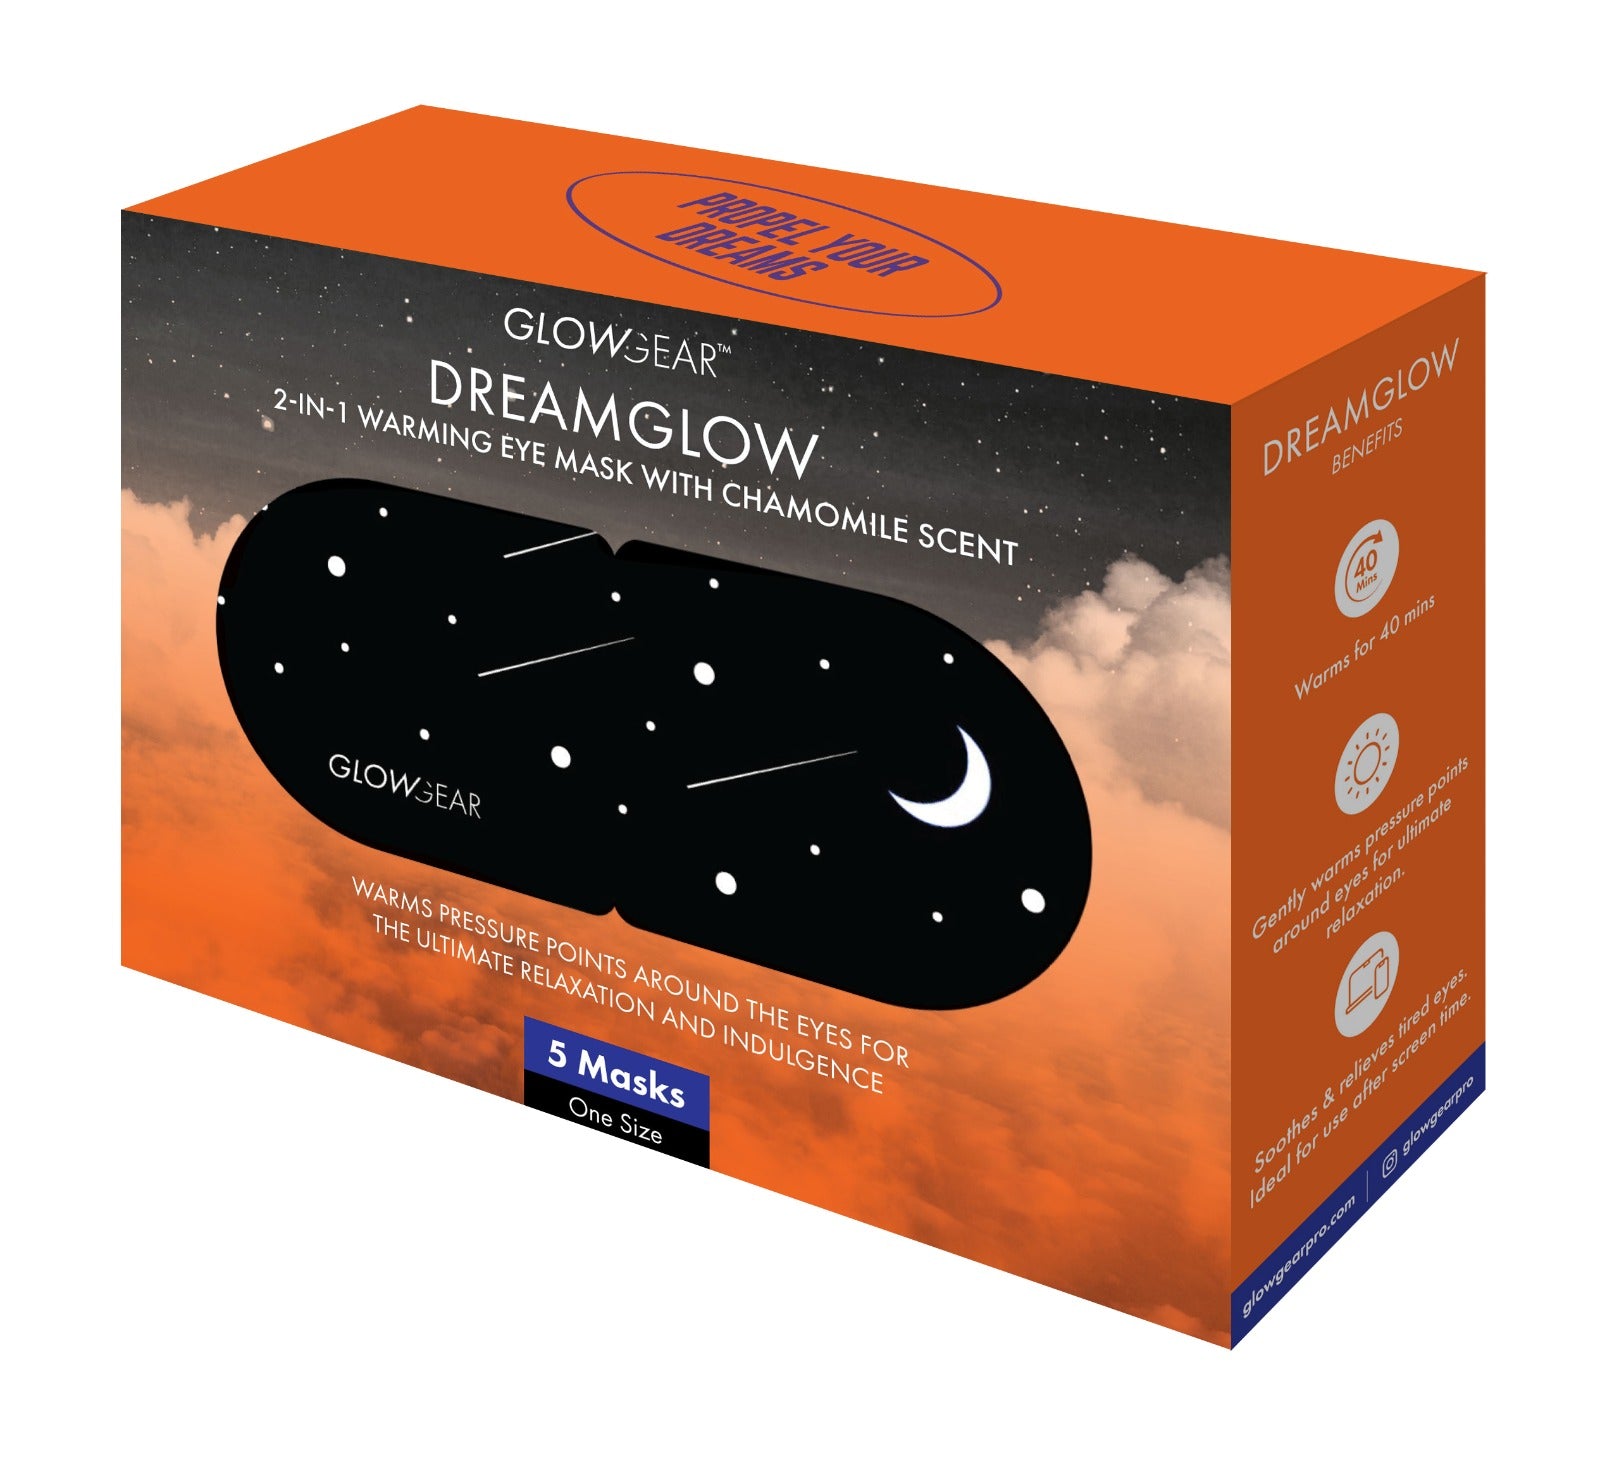 DREAMGLOW 2-in-1 Warming Eye Mask With Chamomile